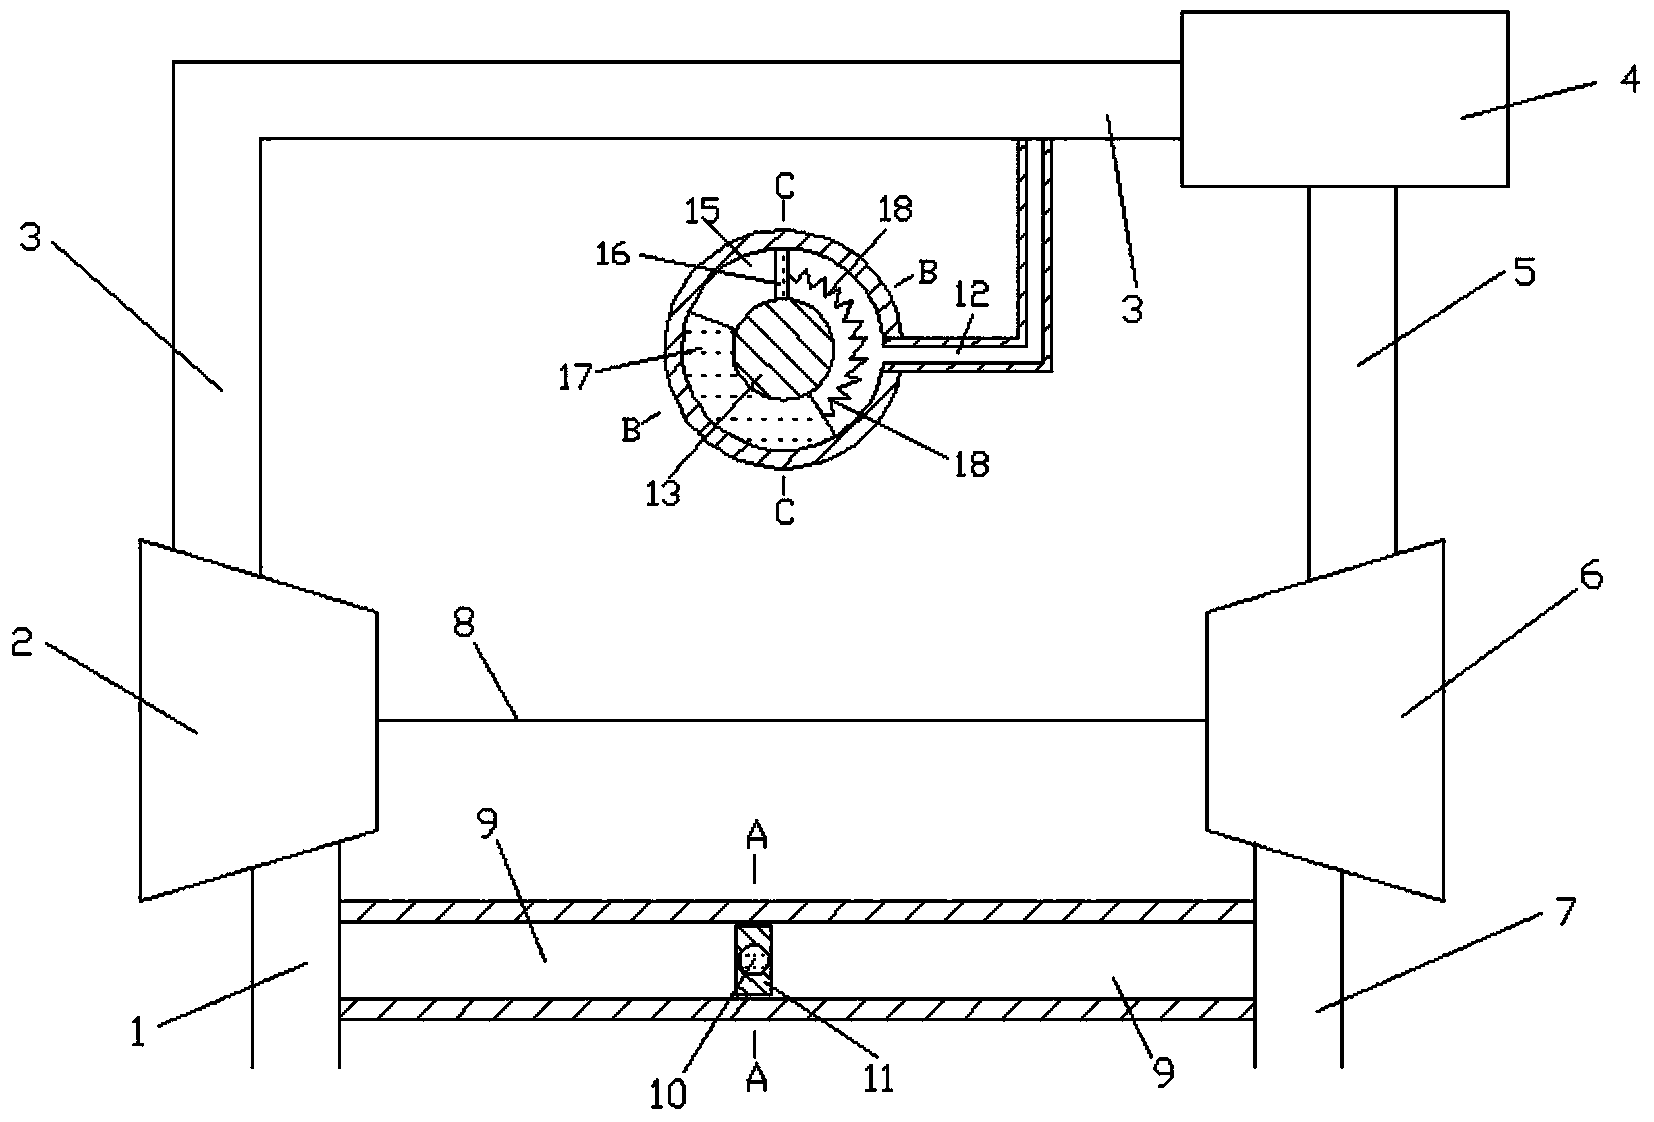 Adjustable low-pressure exhaust circulating system with rotating mechanism